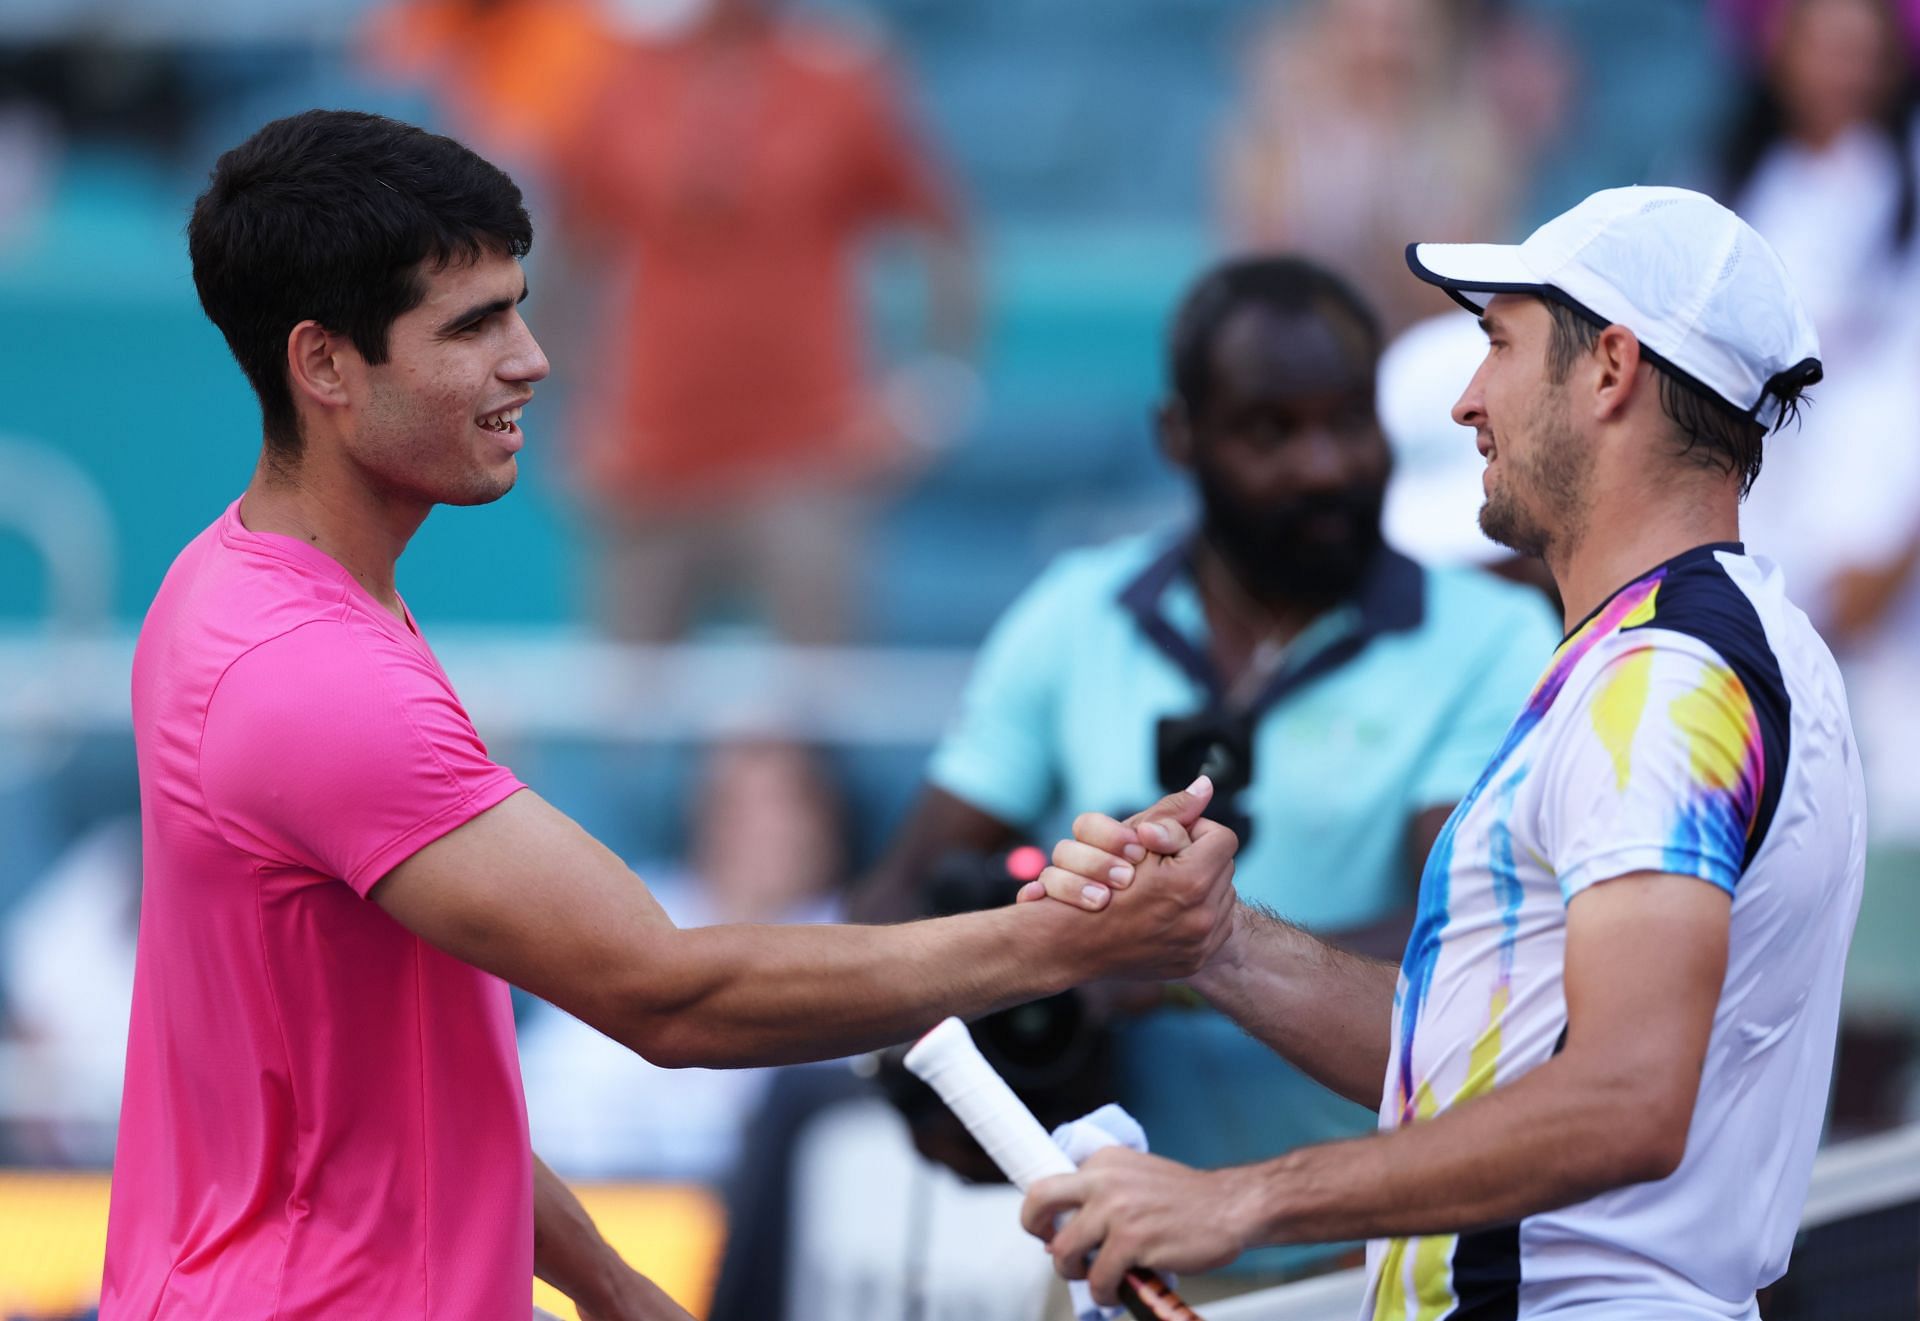 Carlos Alcaraz and Dusan Lajovic after their match at the 2023 Miami Open